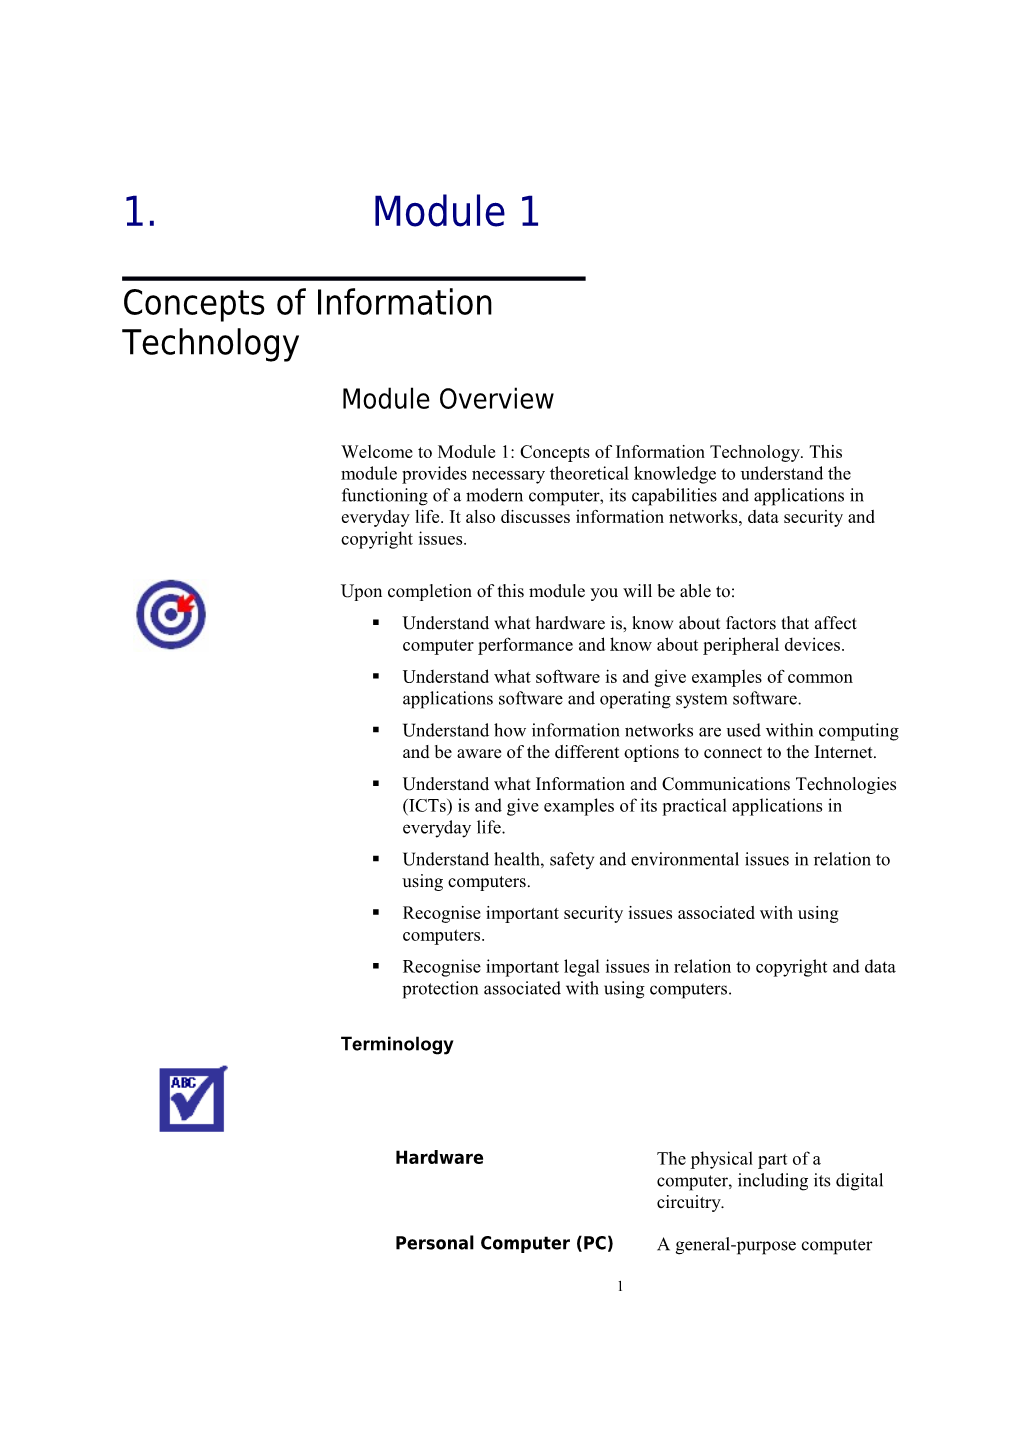 Concepts of Information Technology